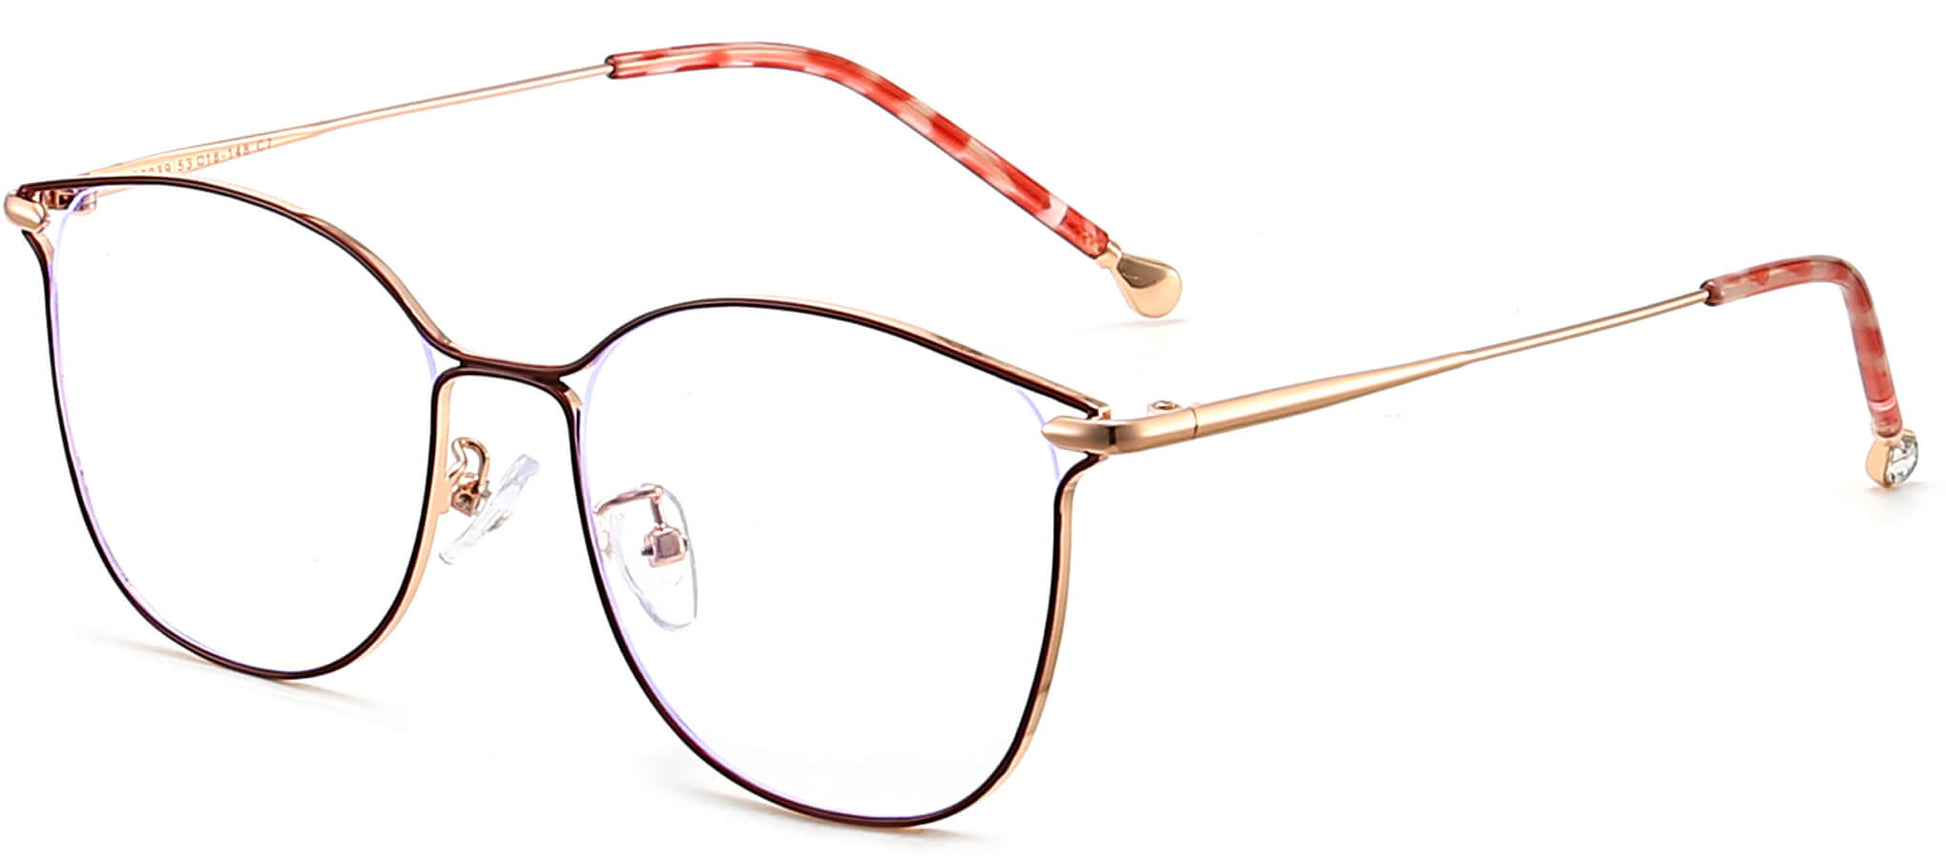 Gazelle metal gold pink Eyeglasses from ANRRI, angle view